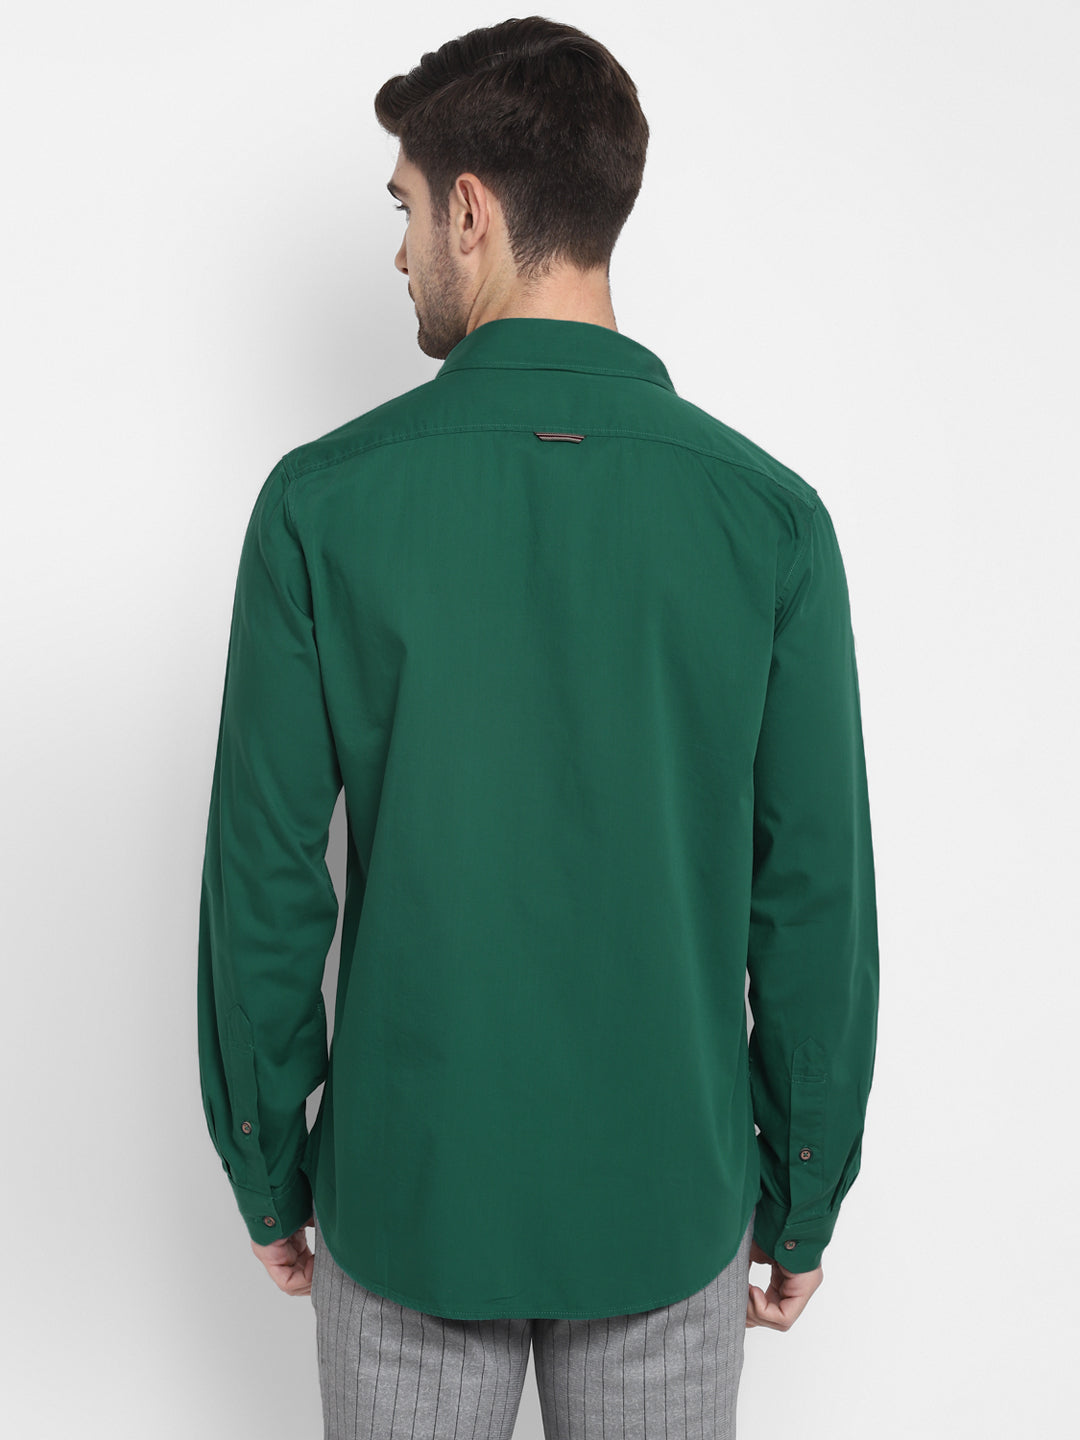 Solid Green Slim Fit Causal Shirt